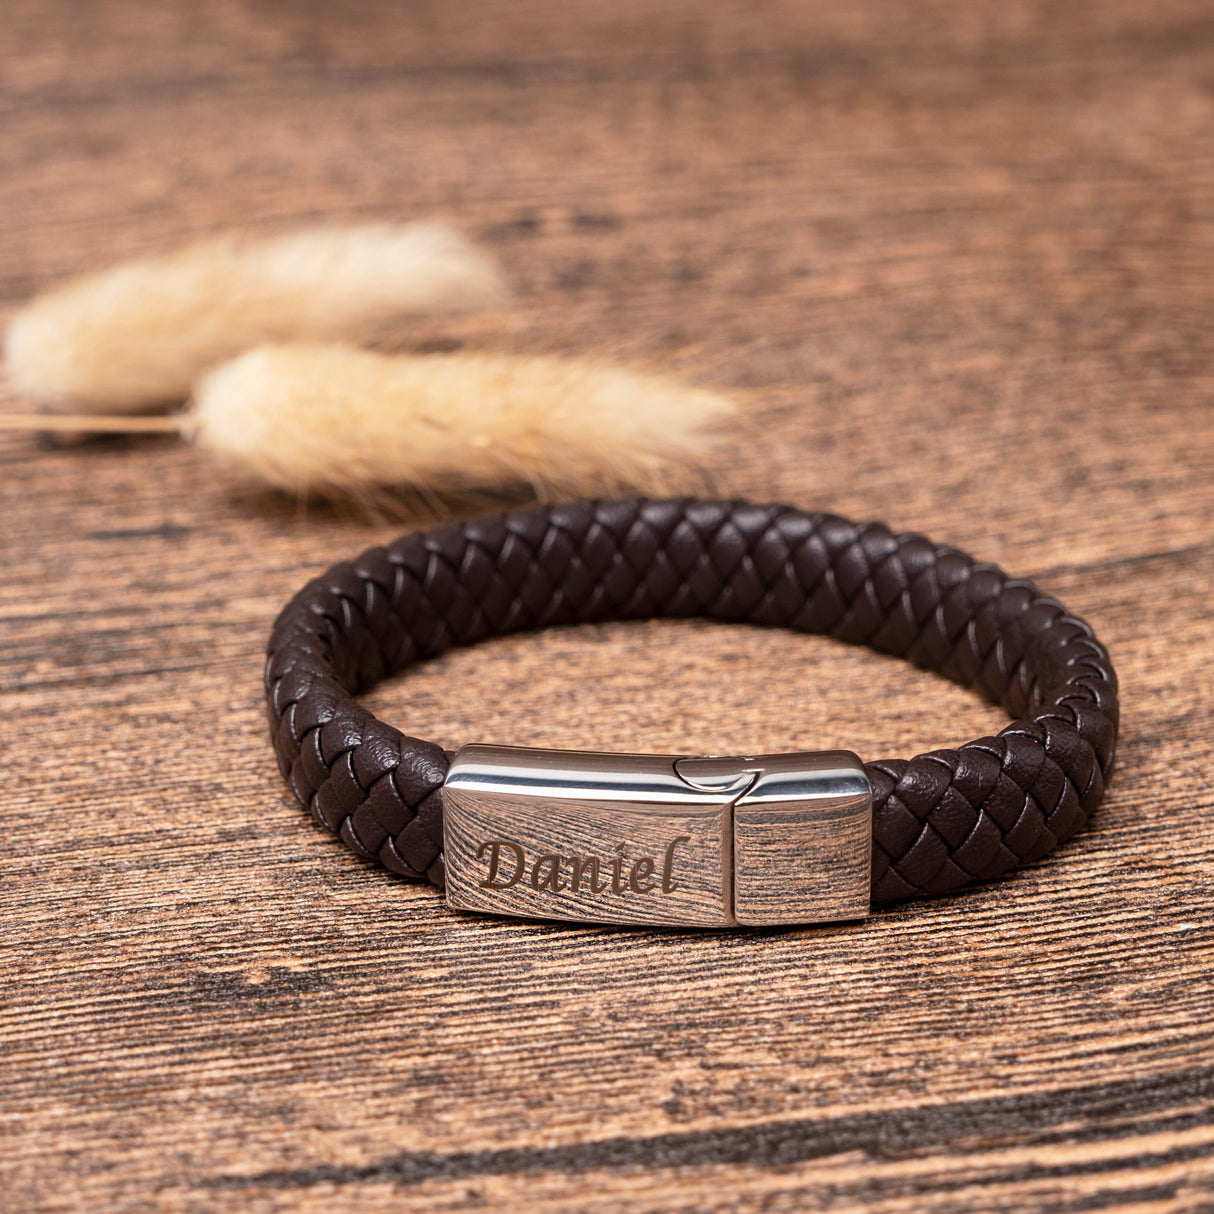 GEX Personalized Engraving Leather Bracelet Jewelry for Men - GexWorldwide